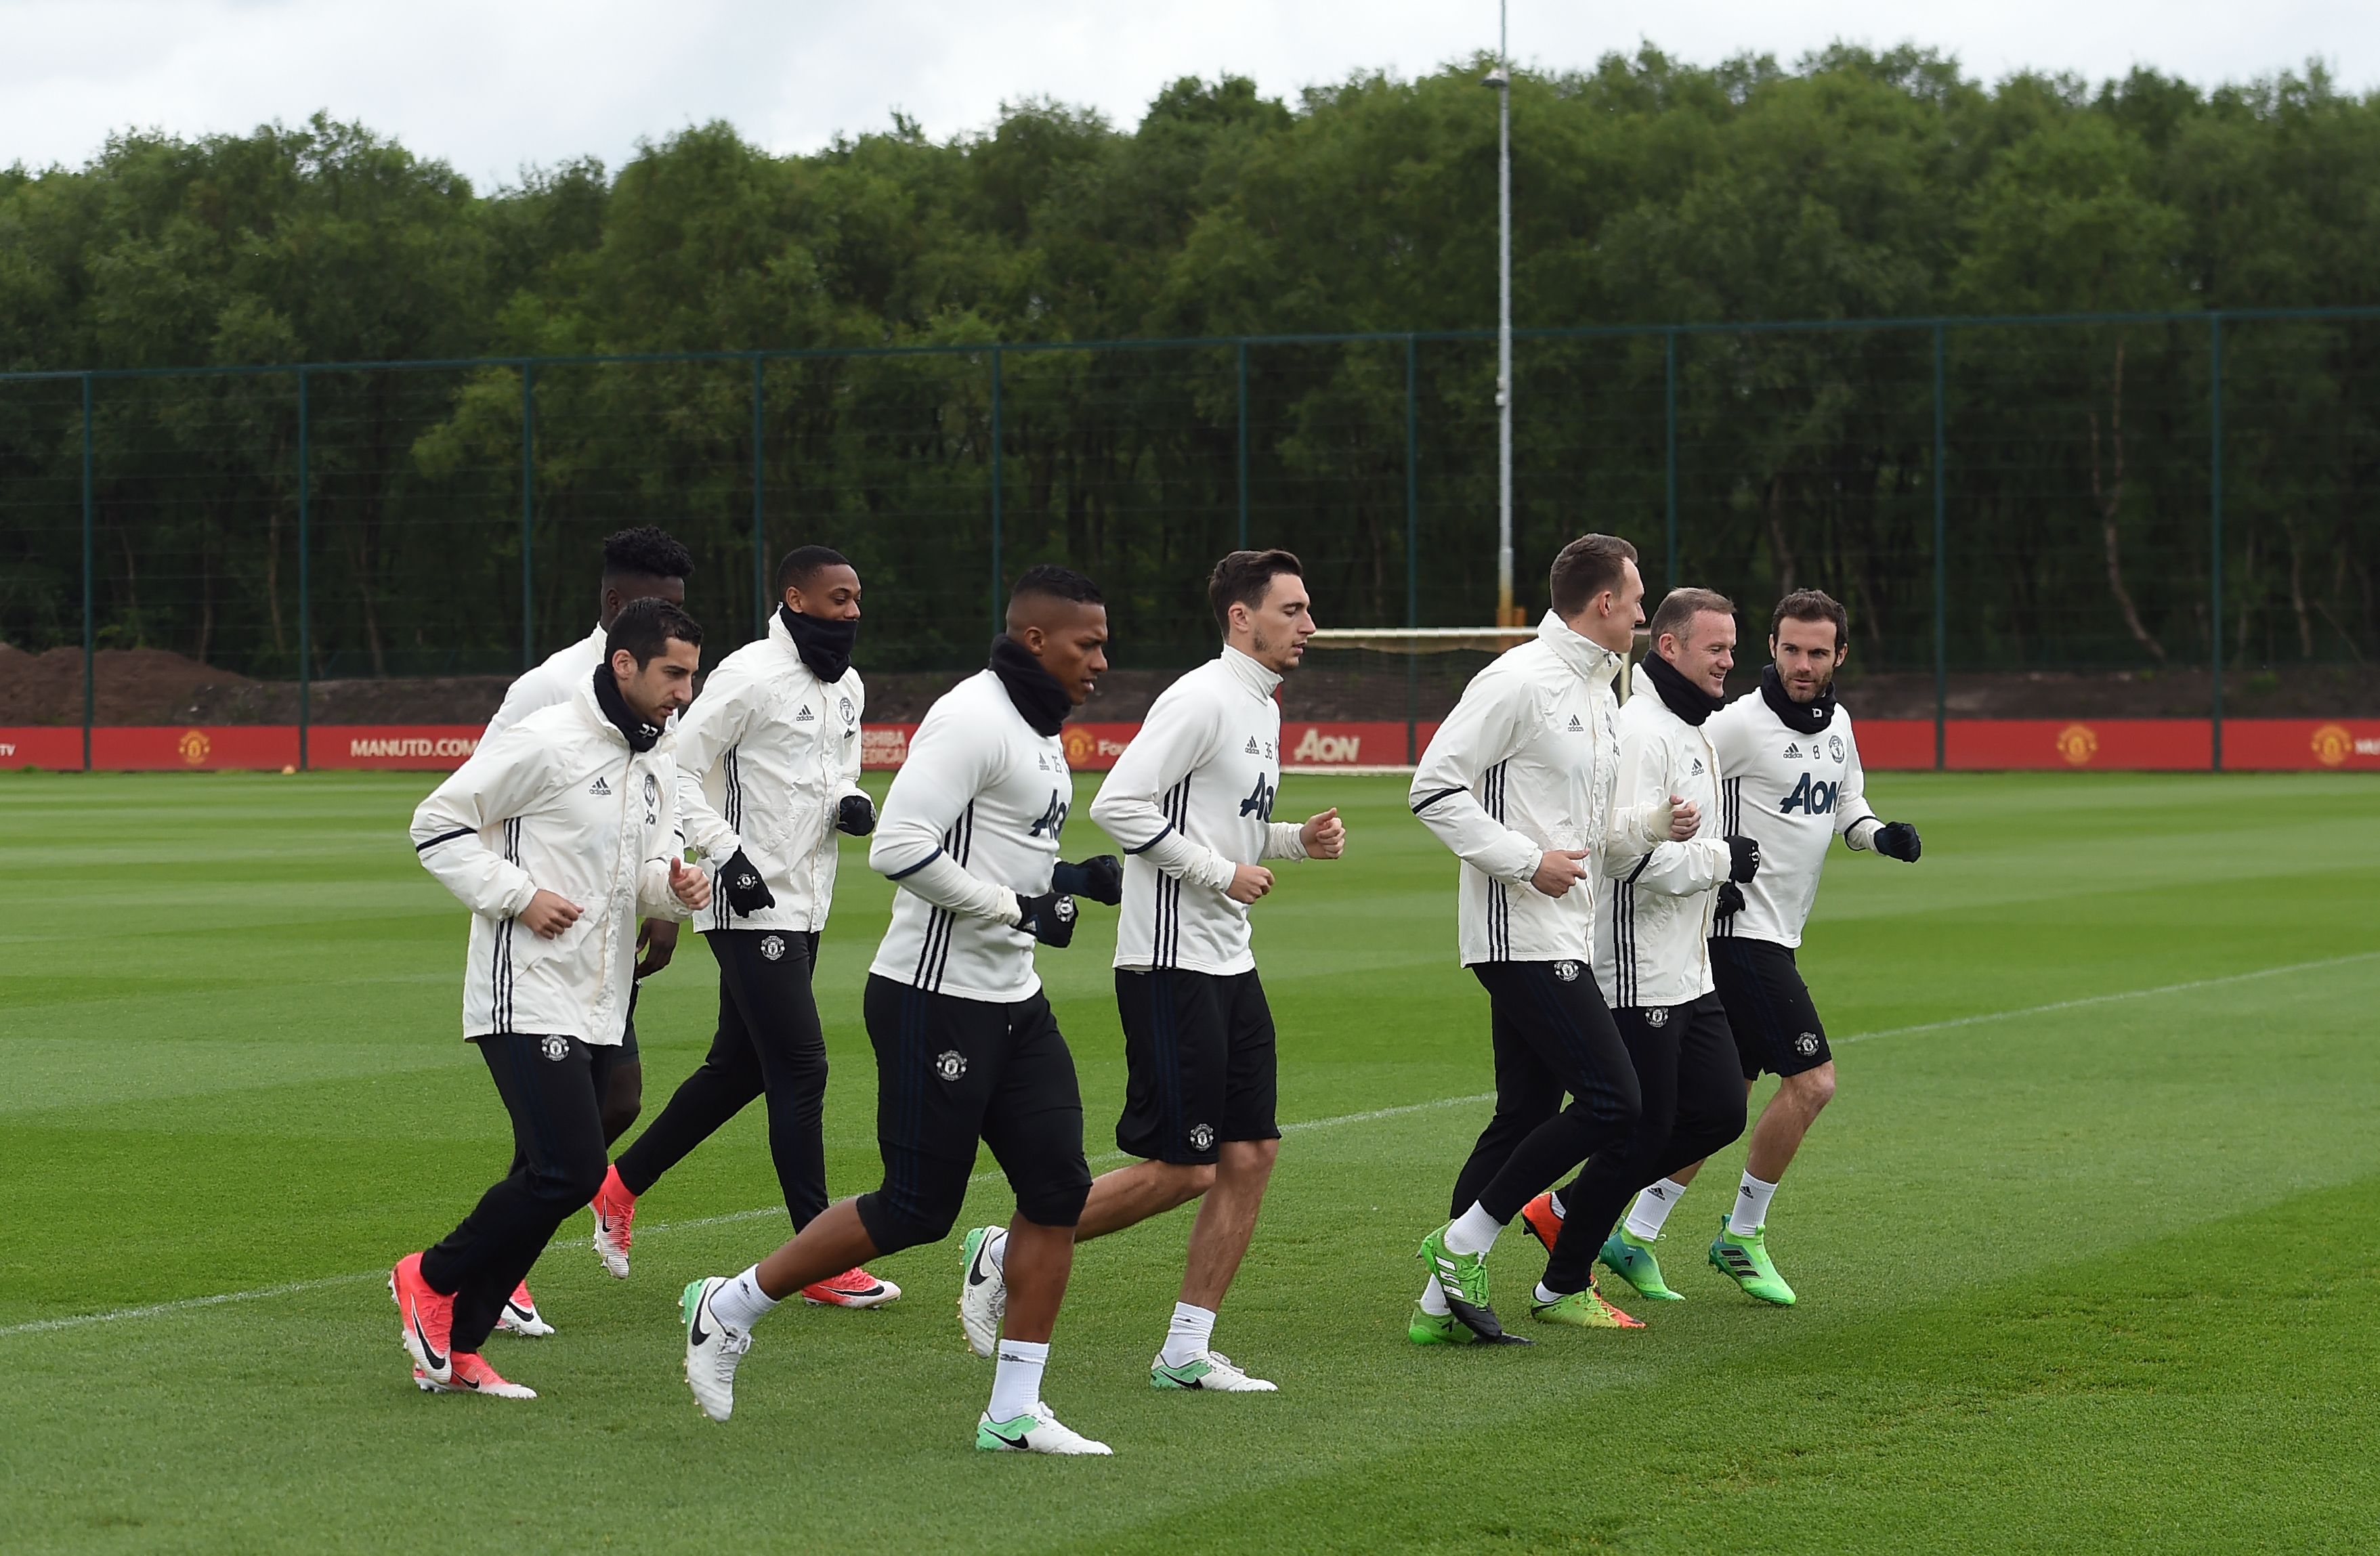 Manchester United's players attend a team training session as part of a media open day at the club's training complex near Carrington, west of Manchester in north west England on May 19, 2017, ahead of their UEFA Europa League final football match against Ajax. / AFP PHOTO / Paul ELLIS        (Photo credit should read PAUL ELLIS/AFP/Getty Images)